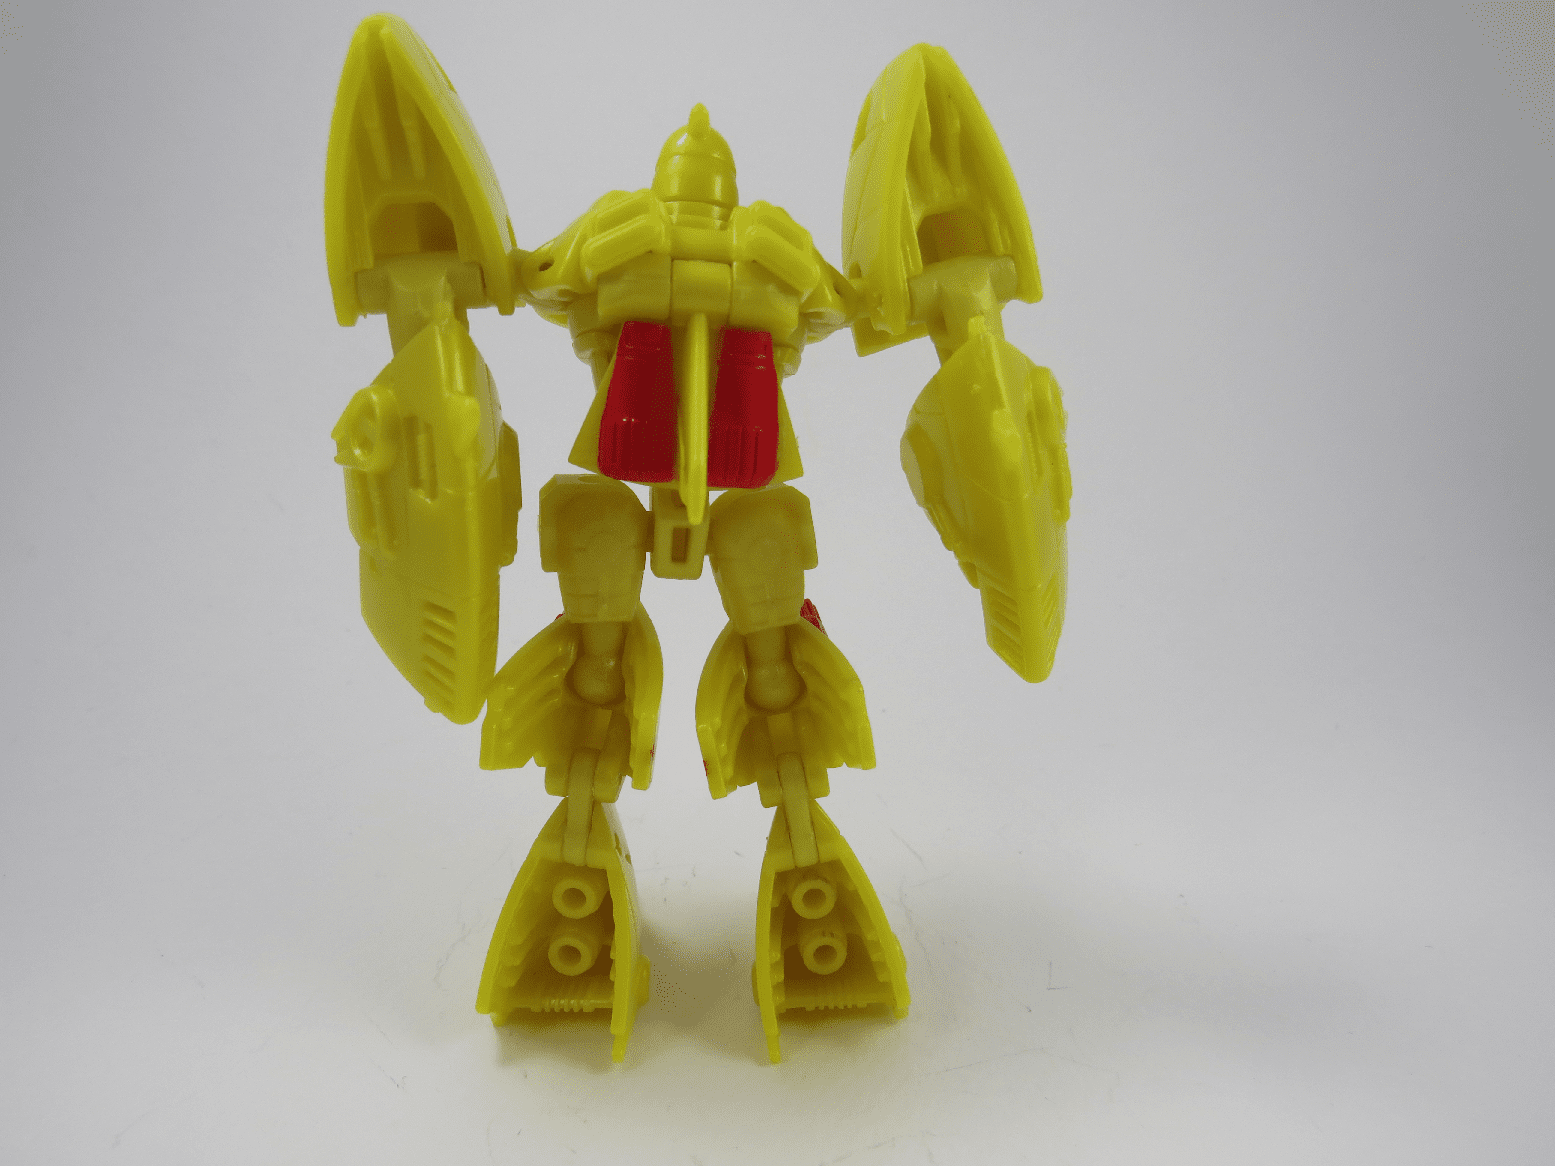 Robot mode. (Scrounge from the Computron gift set)